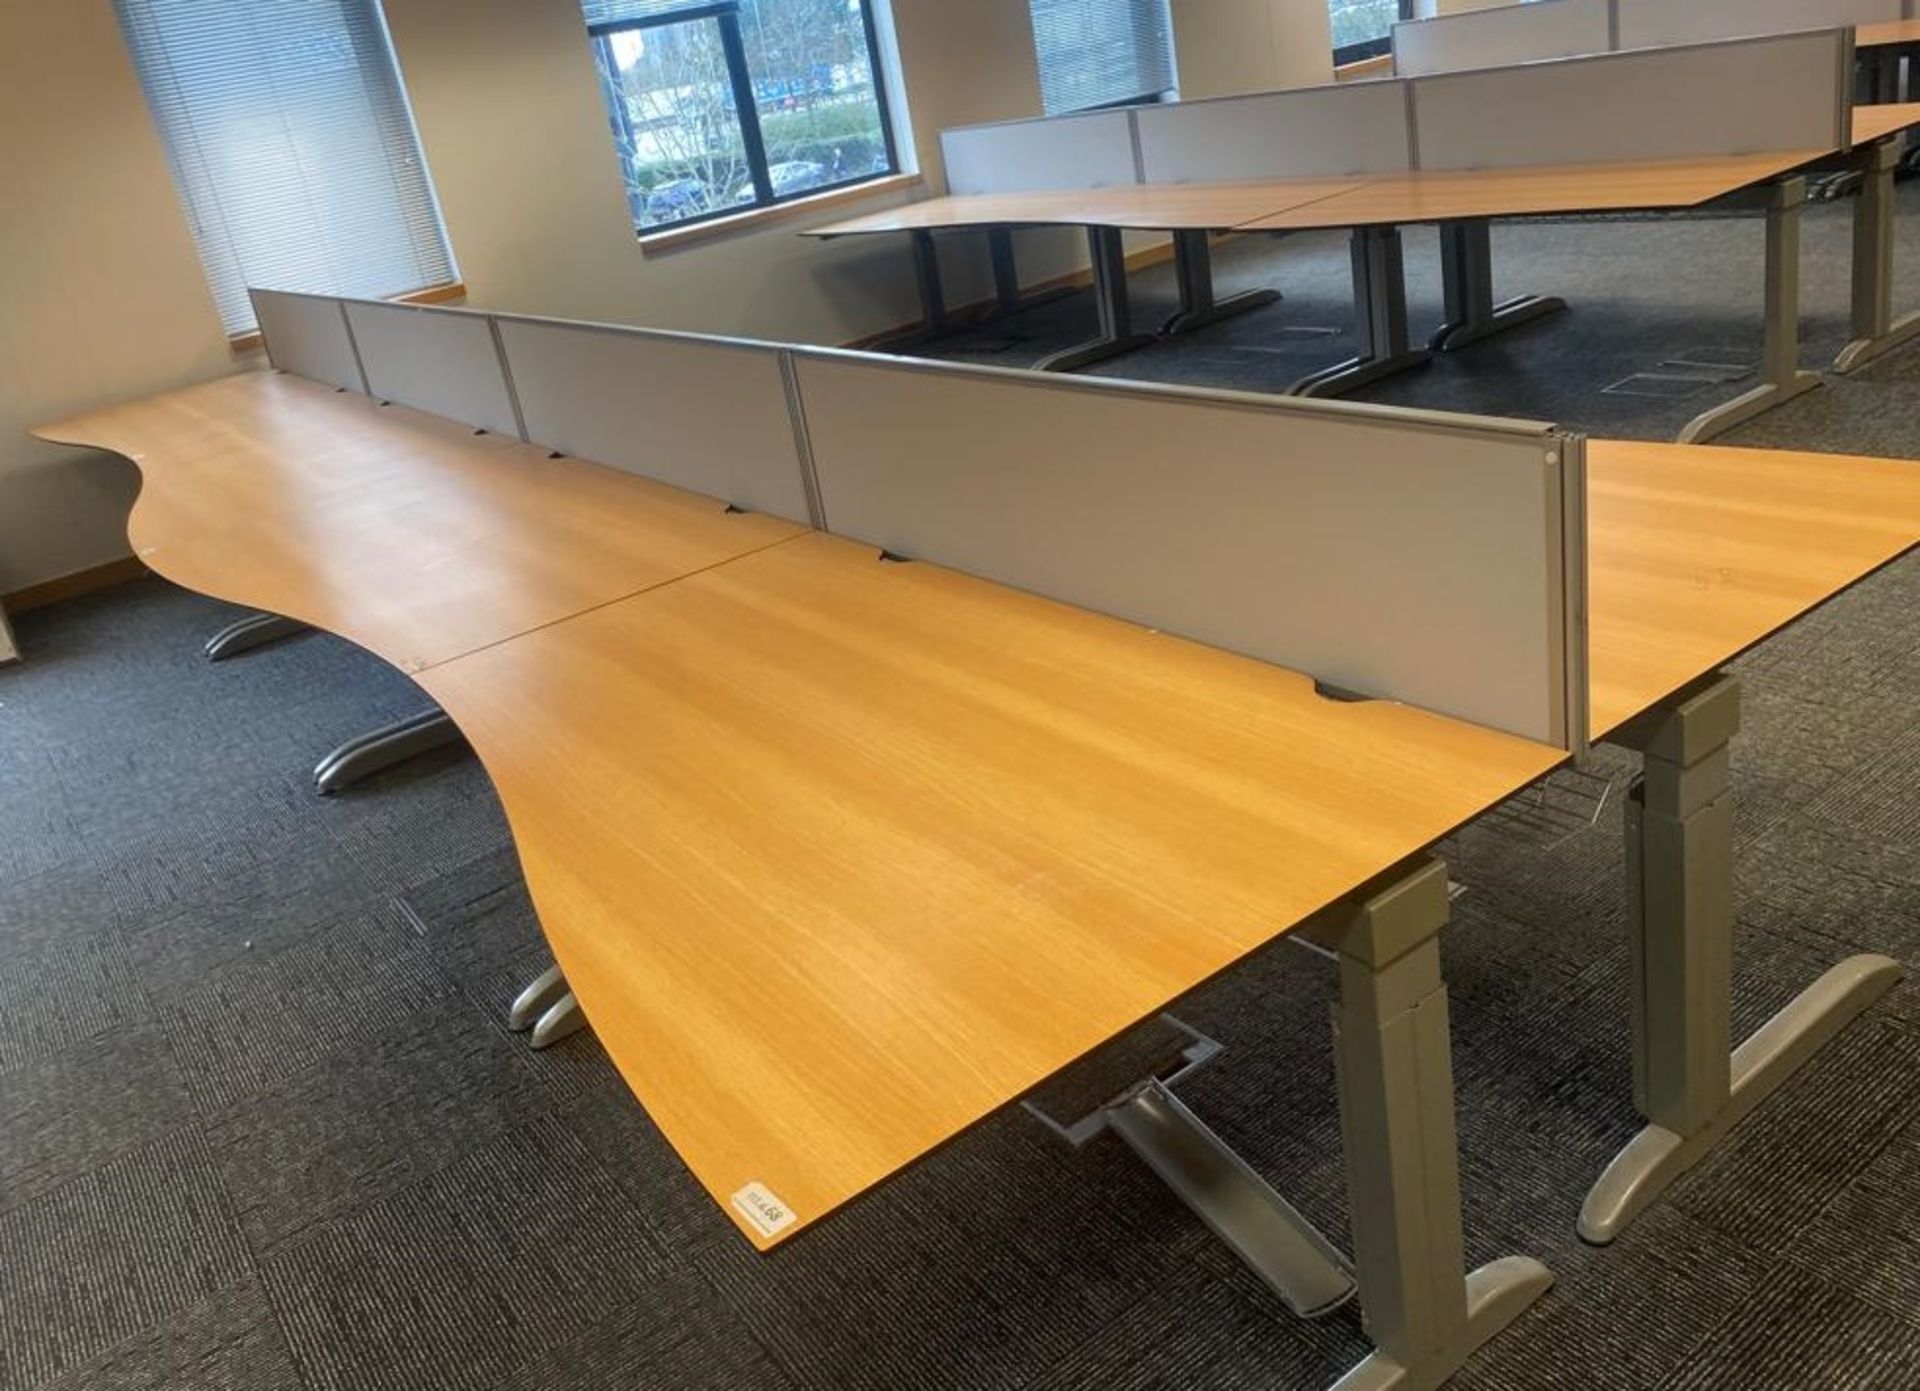 4 x Techo Wave Office Desks With Privacy Panels and Cable Tidy Cages - Beech Wood Finish - Image 16 of 17